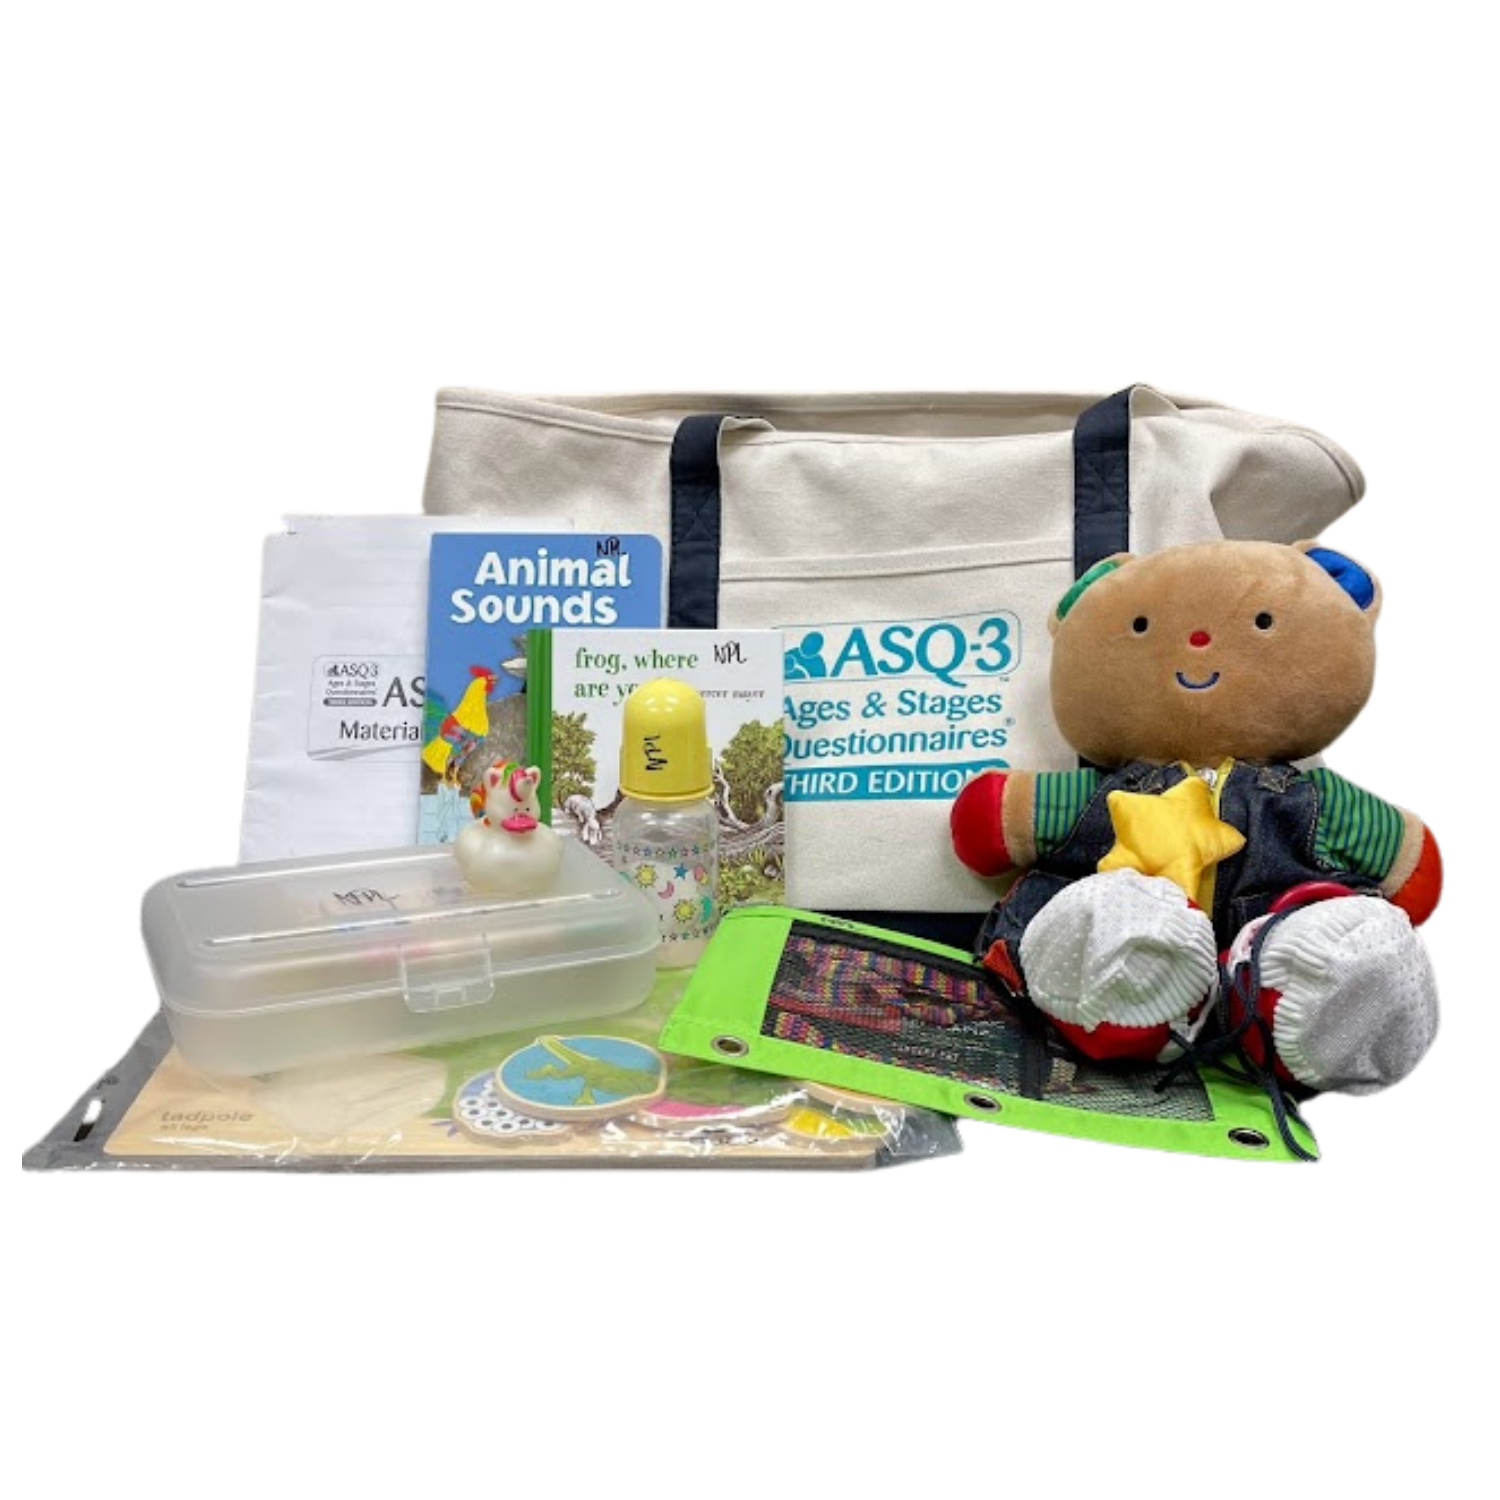 Ages & Stages Kit Image